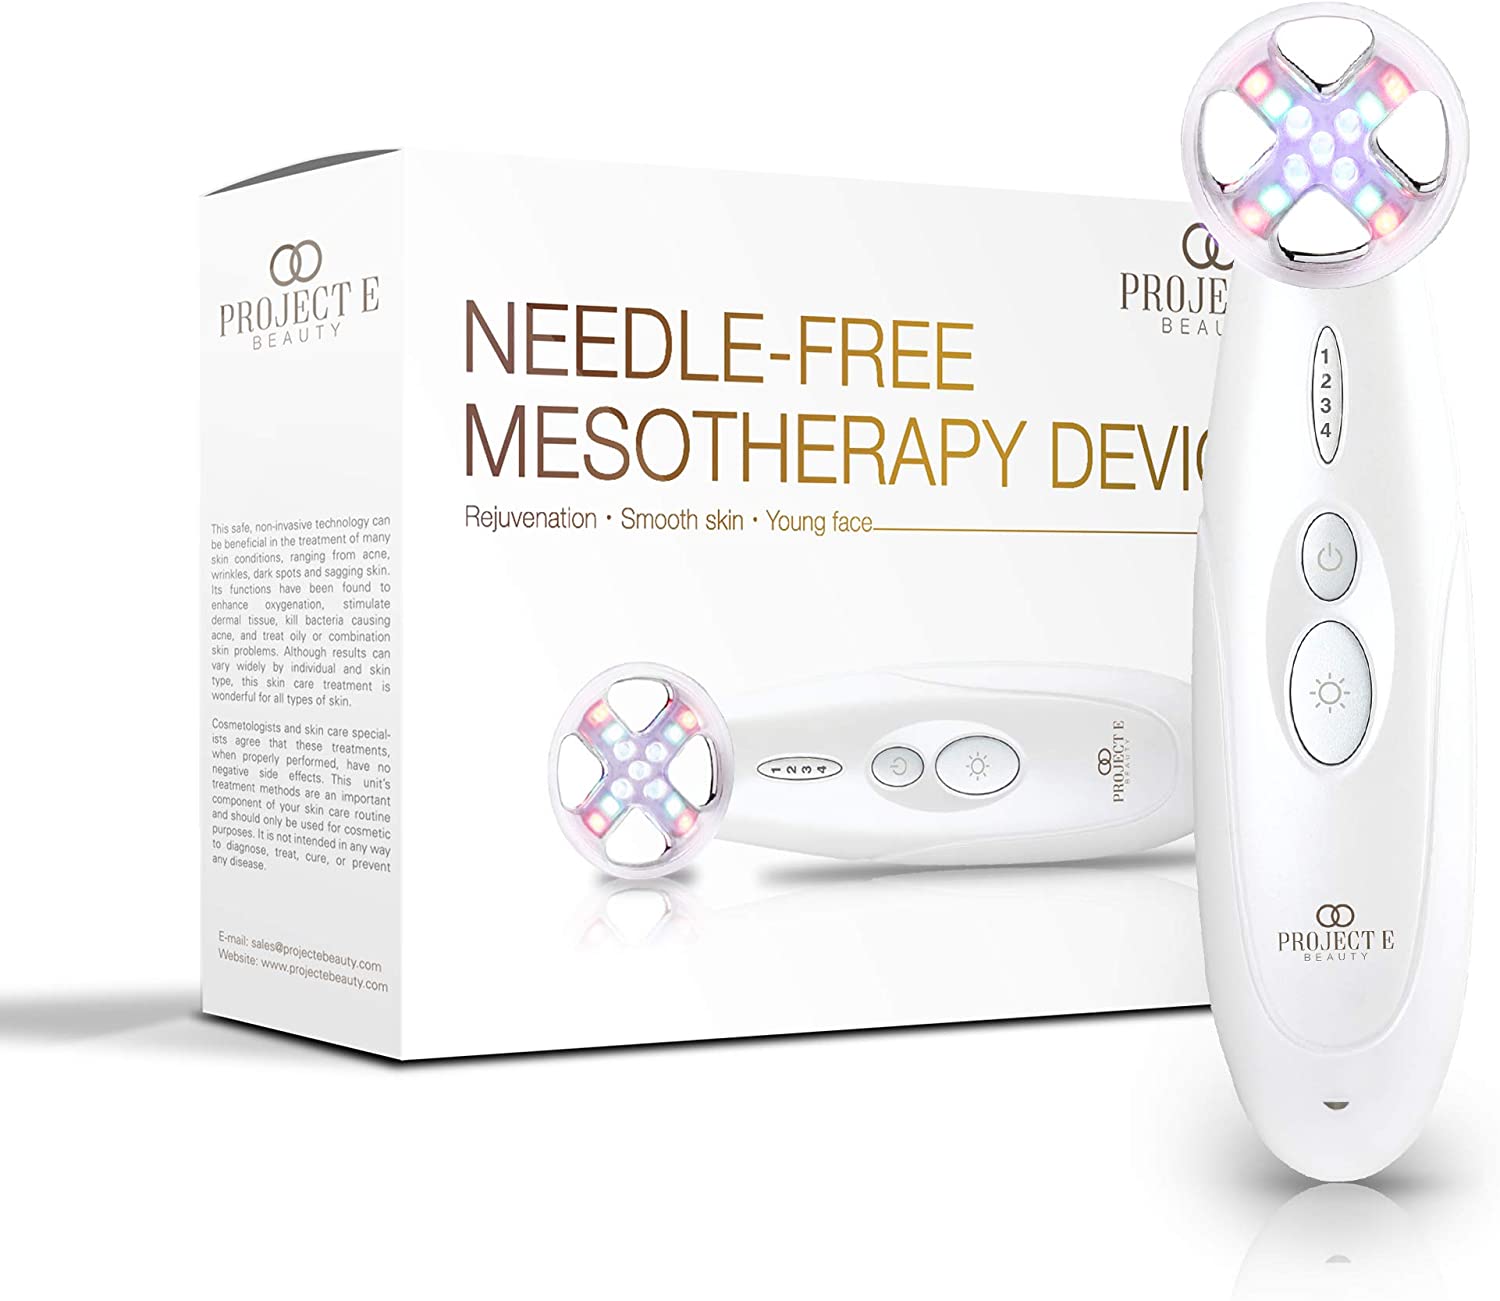 Project E Beauty Needle-Free Mesotherapy Device 